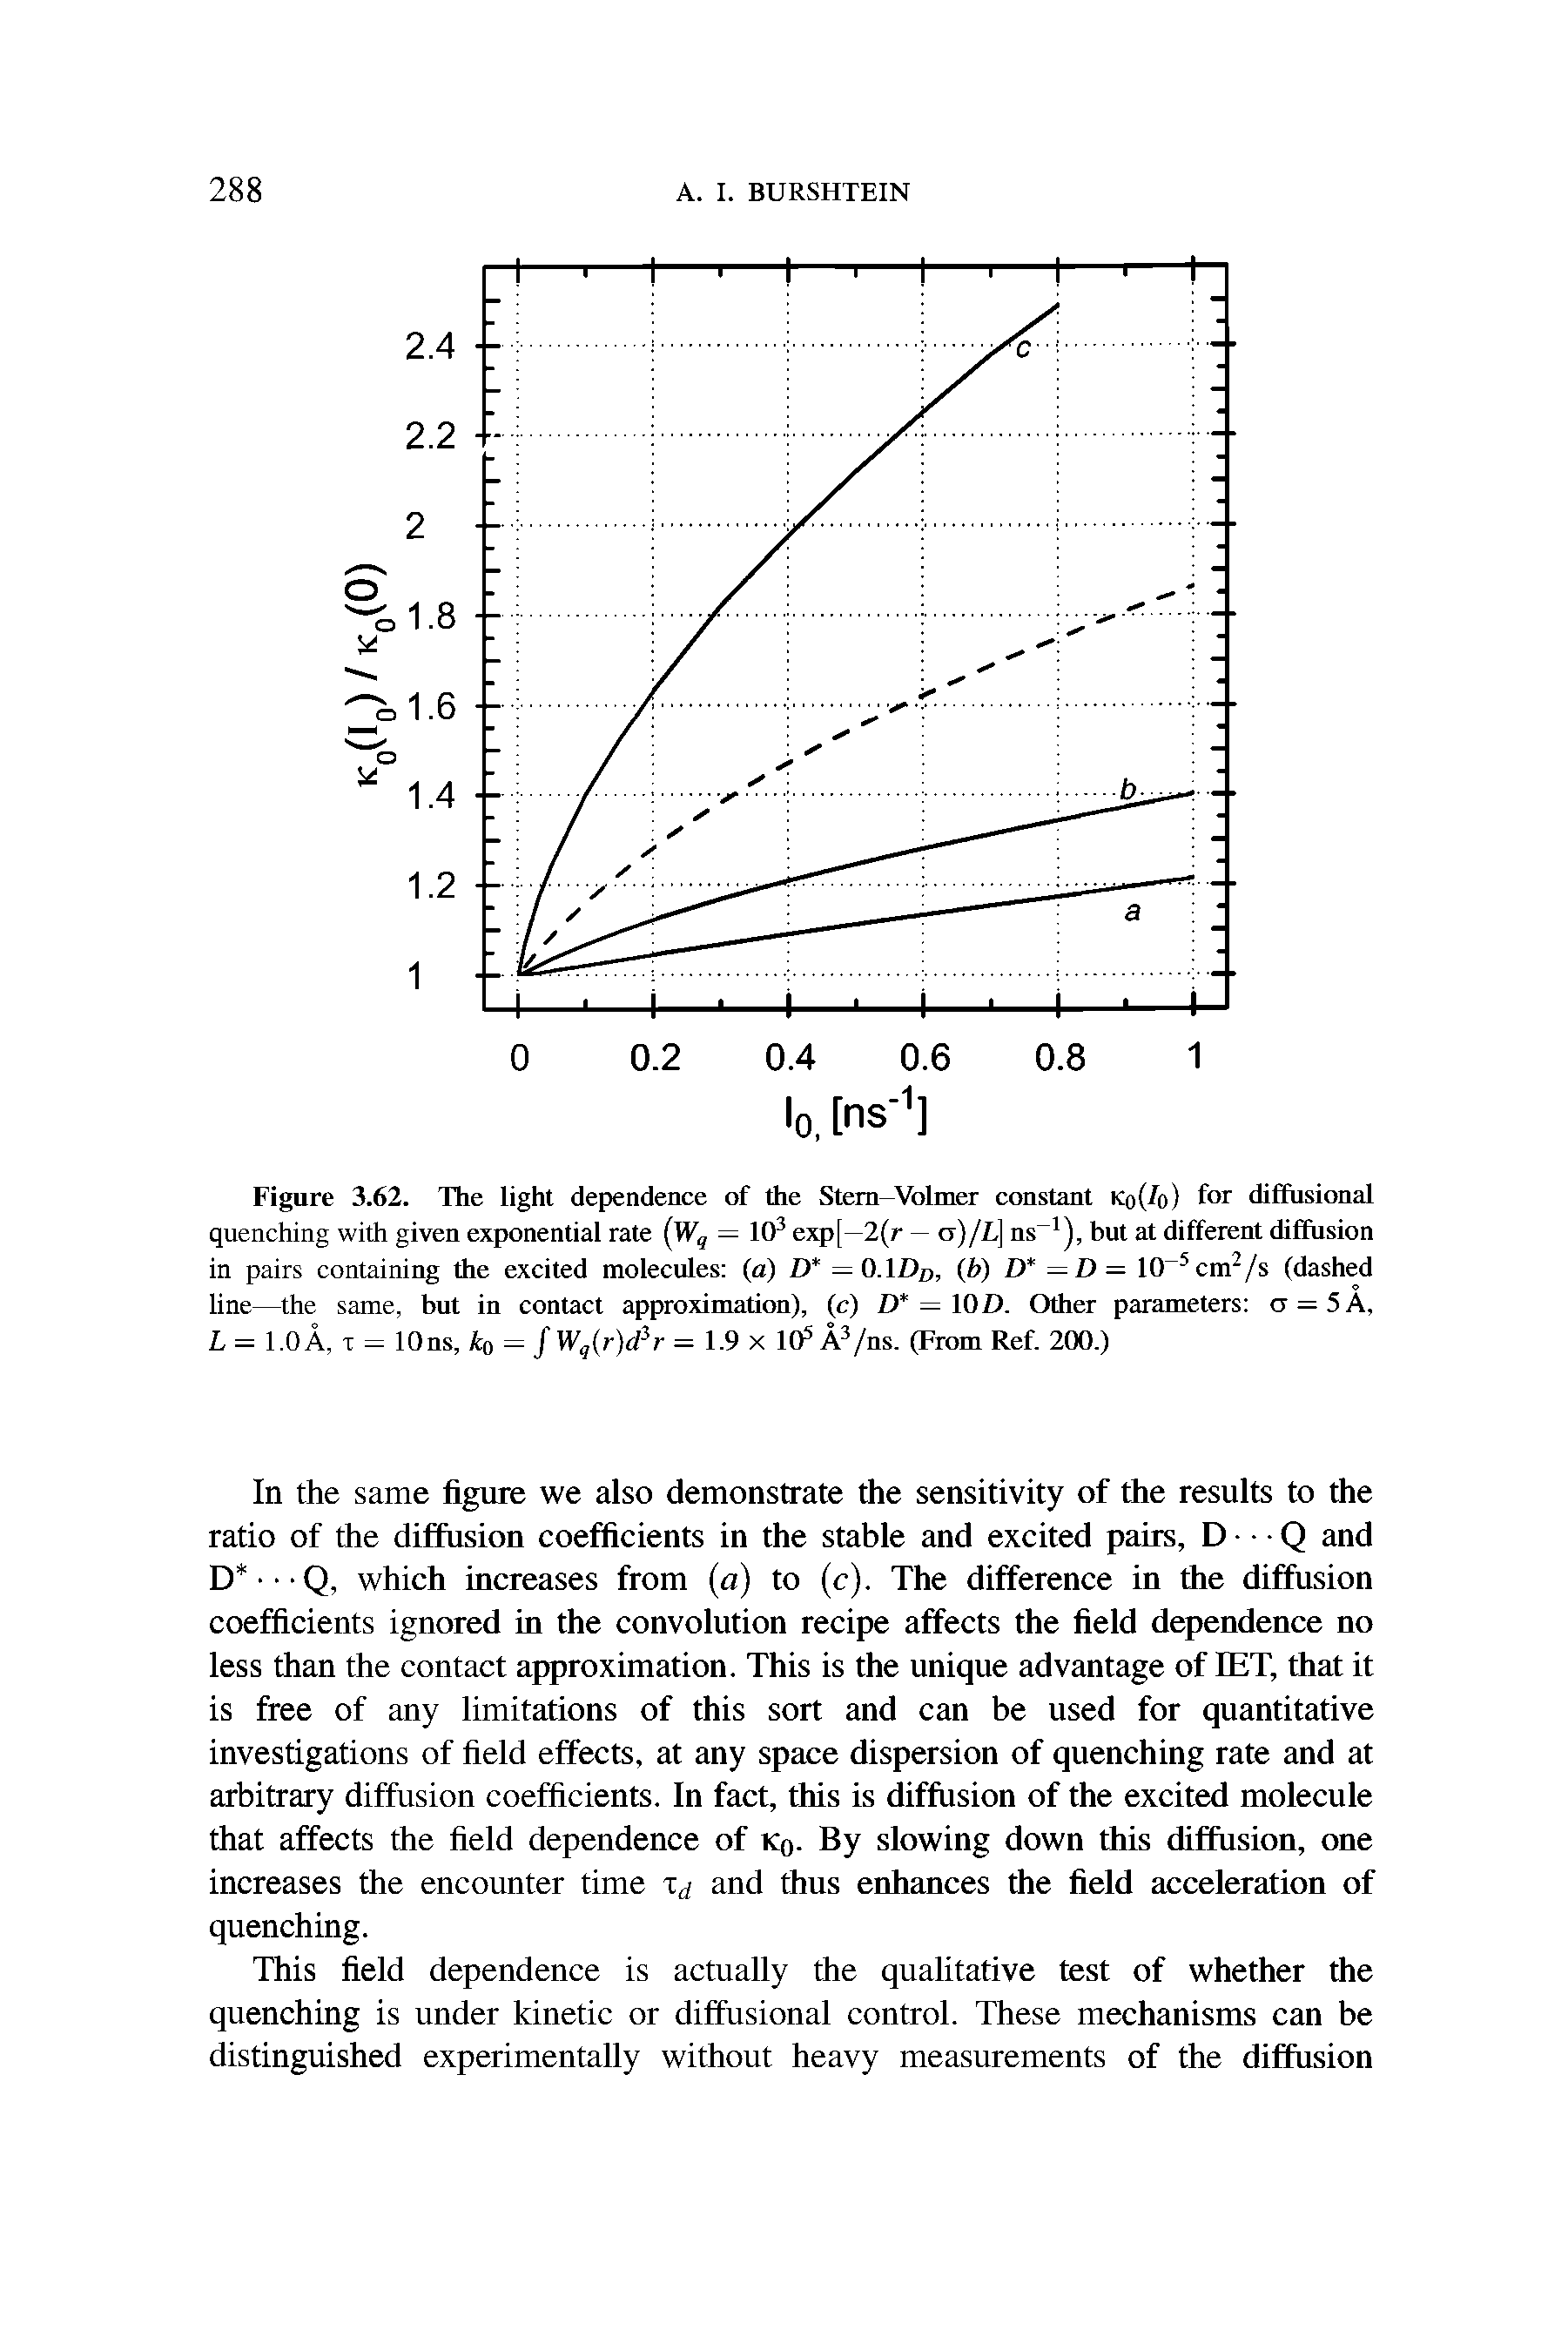 Figure 3.62. The light dependence of the Stem—Volmer constant K, i (/, i for diffusional quenching with given exponential rate (Wq — 103 exp[—2(r — cr)/L] ns-1), but at different diffusion in pairs containing the excited molecules (a) D =0.1 Dd, (6) D = D= 10 5cm2/s (dashed line—the same, but in contact approximation), (c) D = WD. Other parameters a = 5A, L = 1.0 A, i = 10ns, ko = f Wq(r)d3r = 1.9 x 105 A3/ns. (From Ref. 200.)...